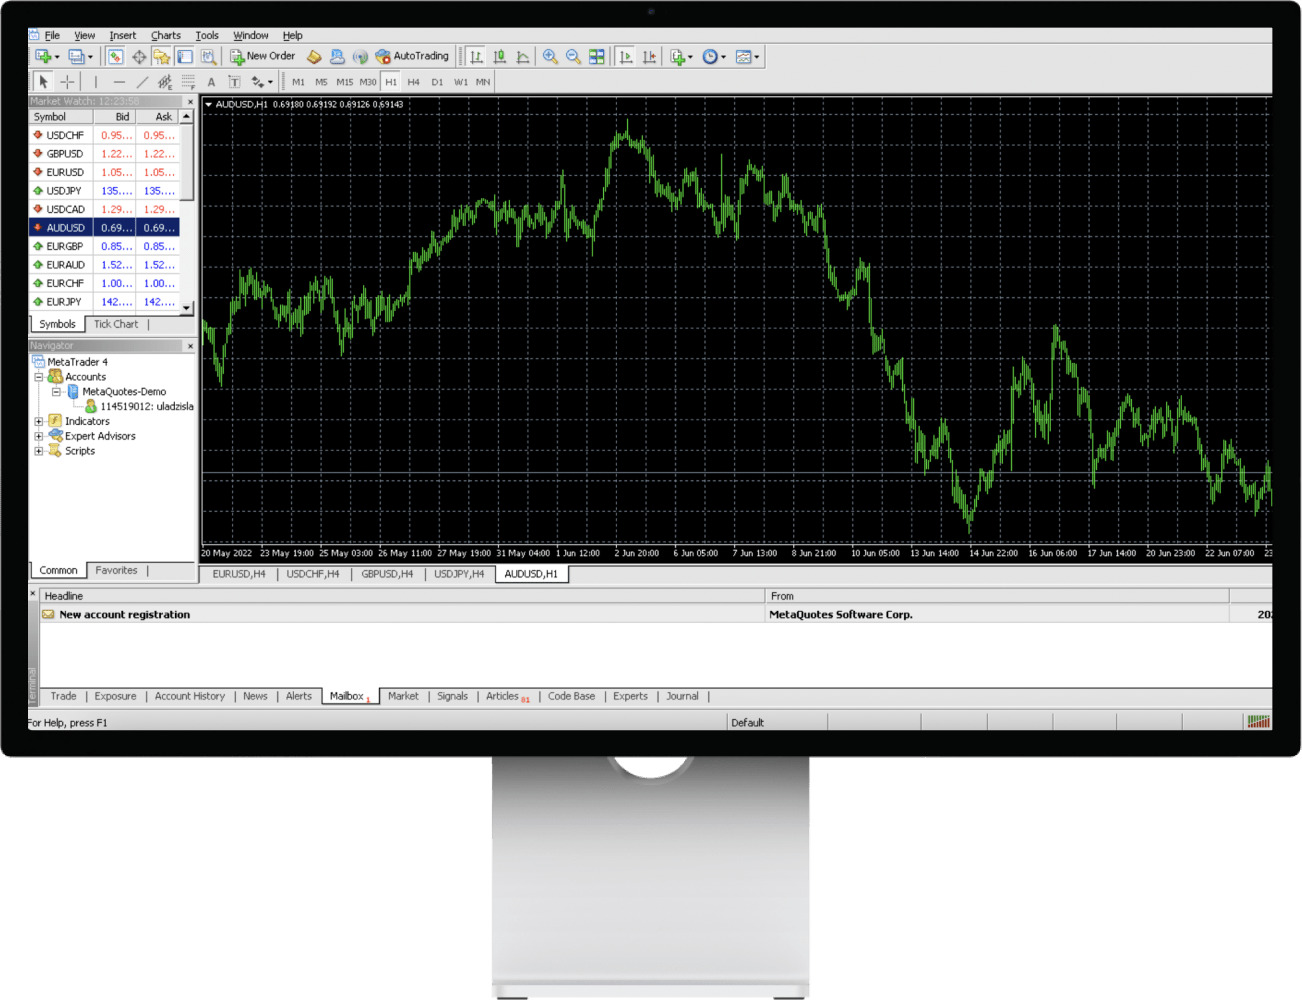 How To Download Metatrader 4 On Mac